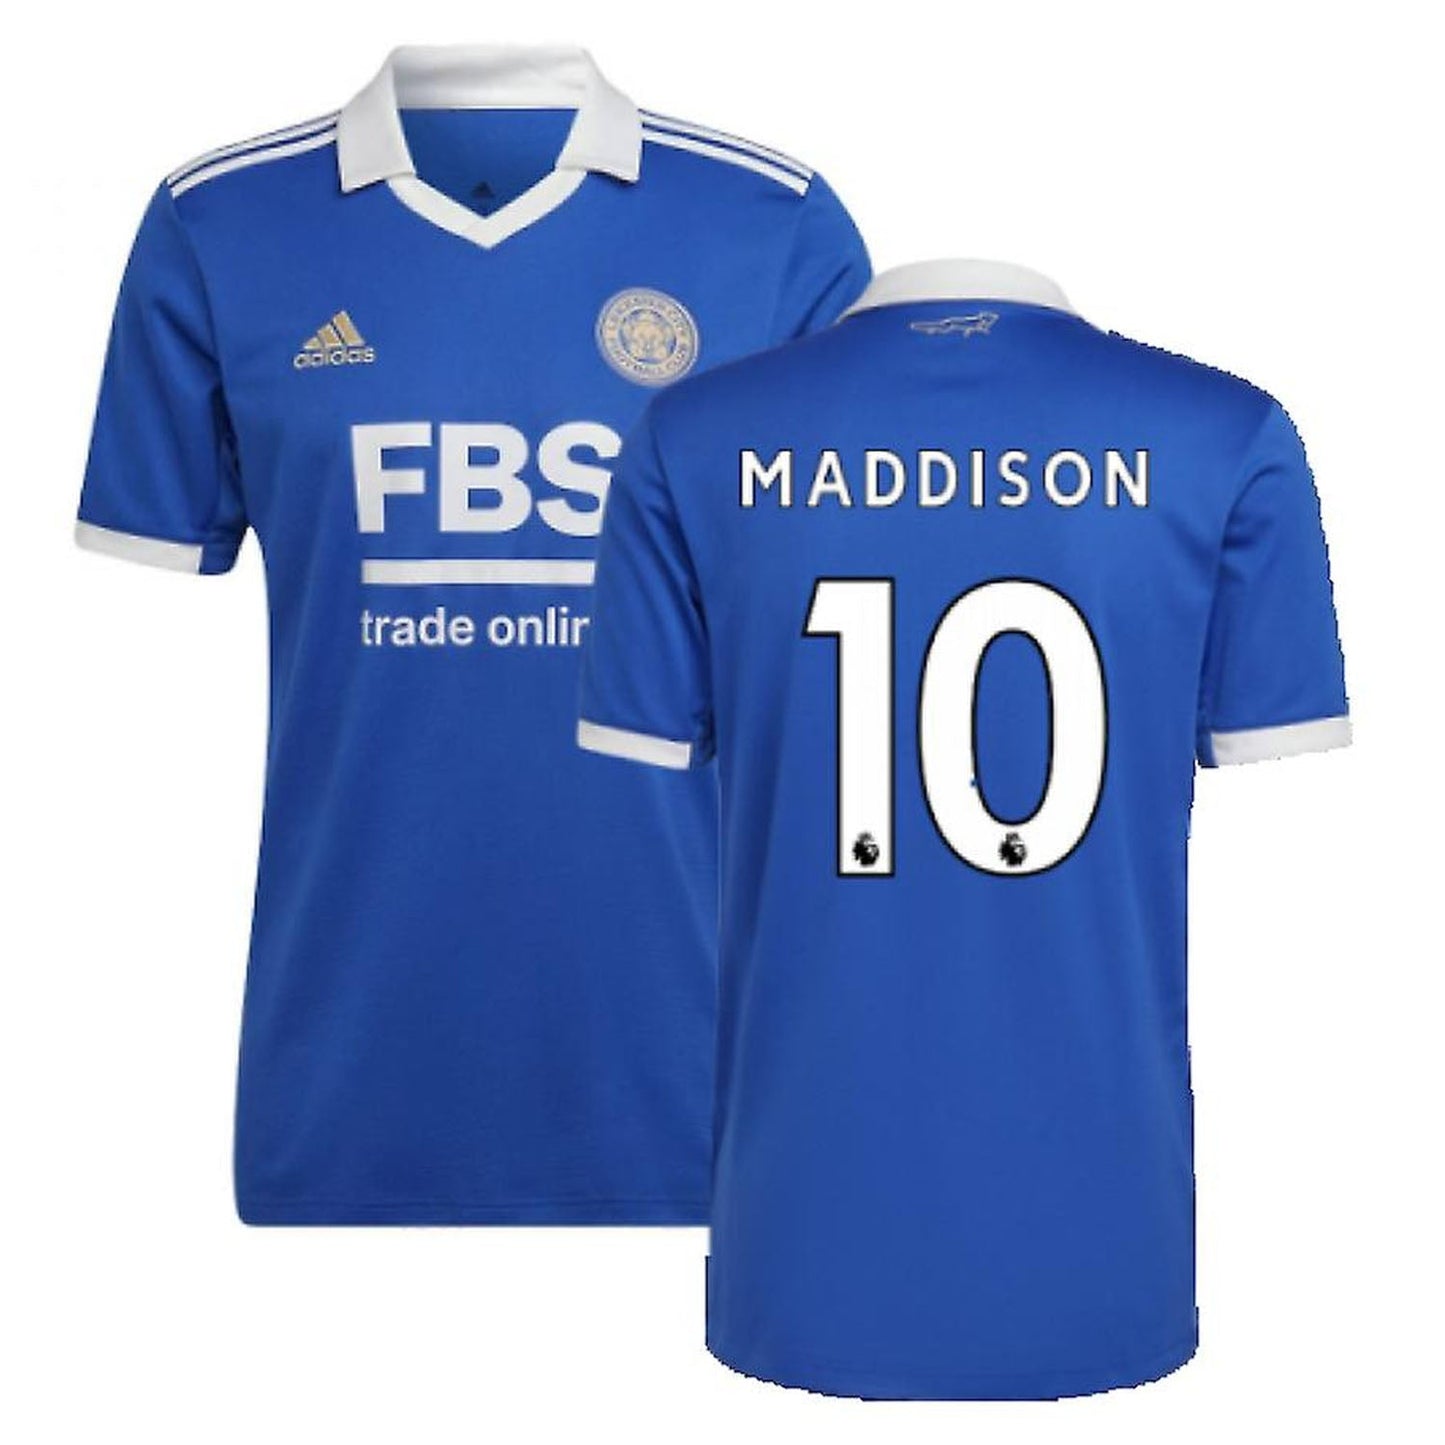 James Madison Leicester City 10 Jersey